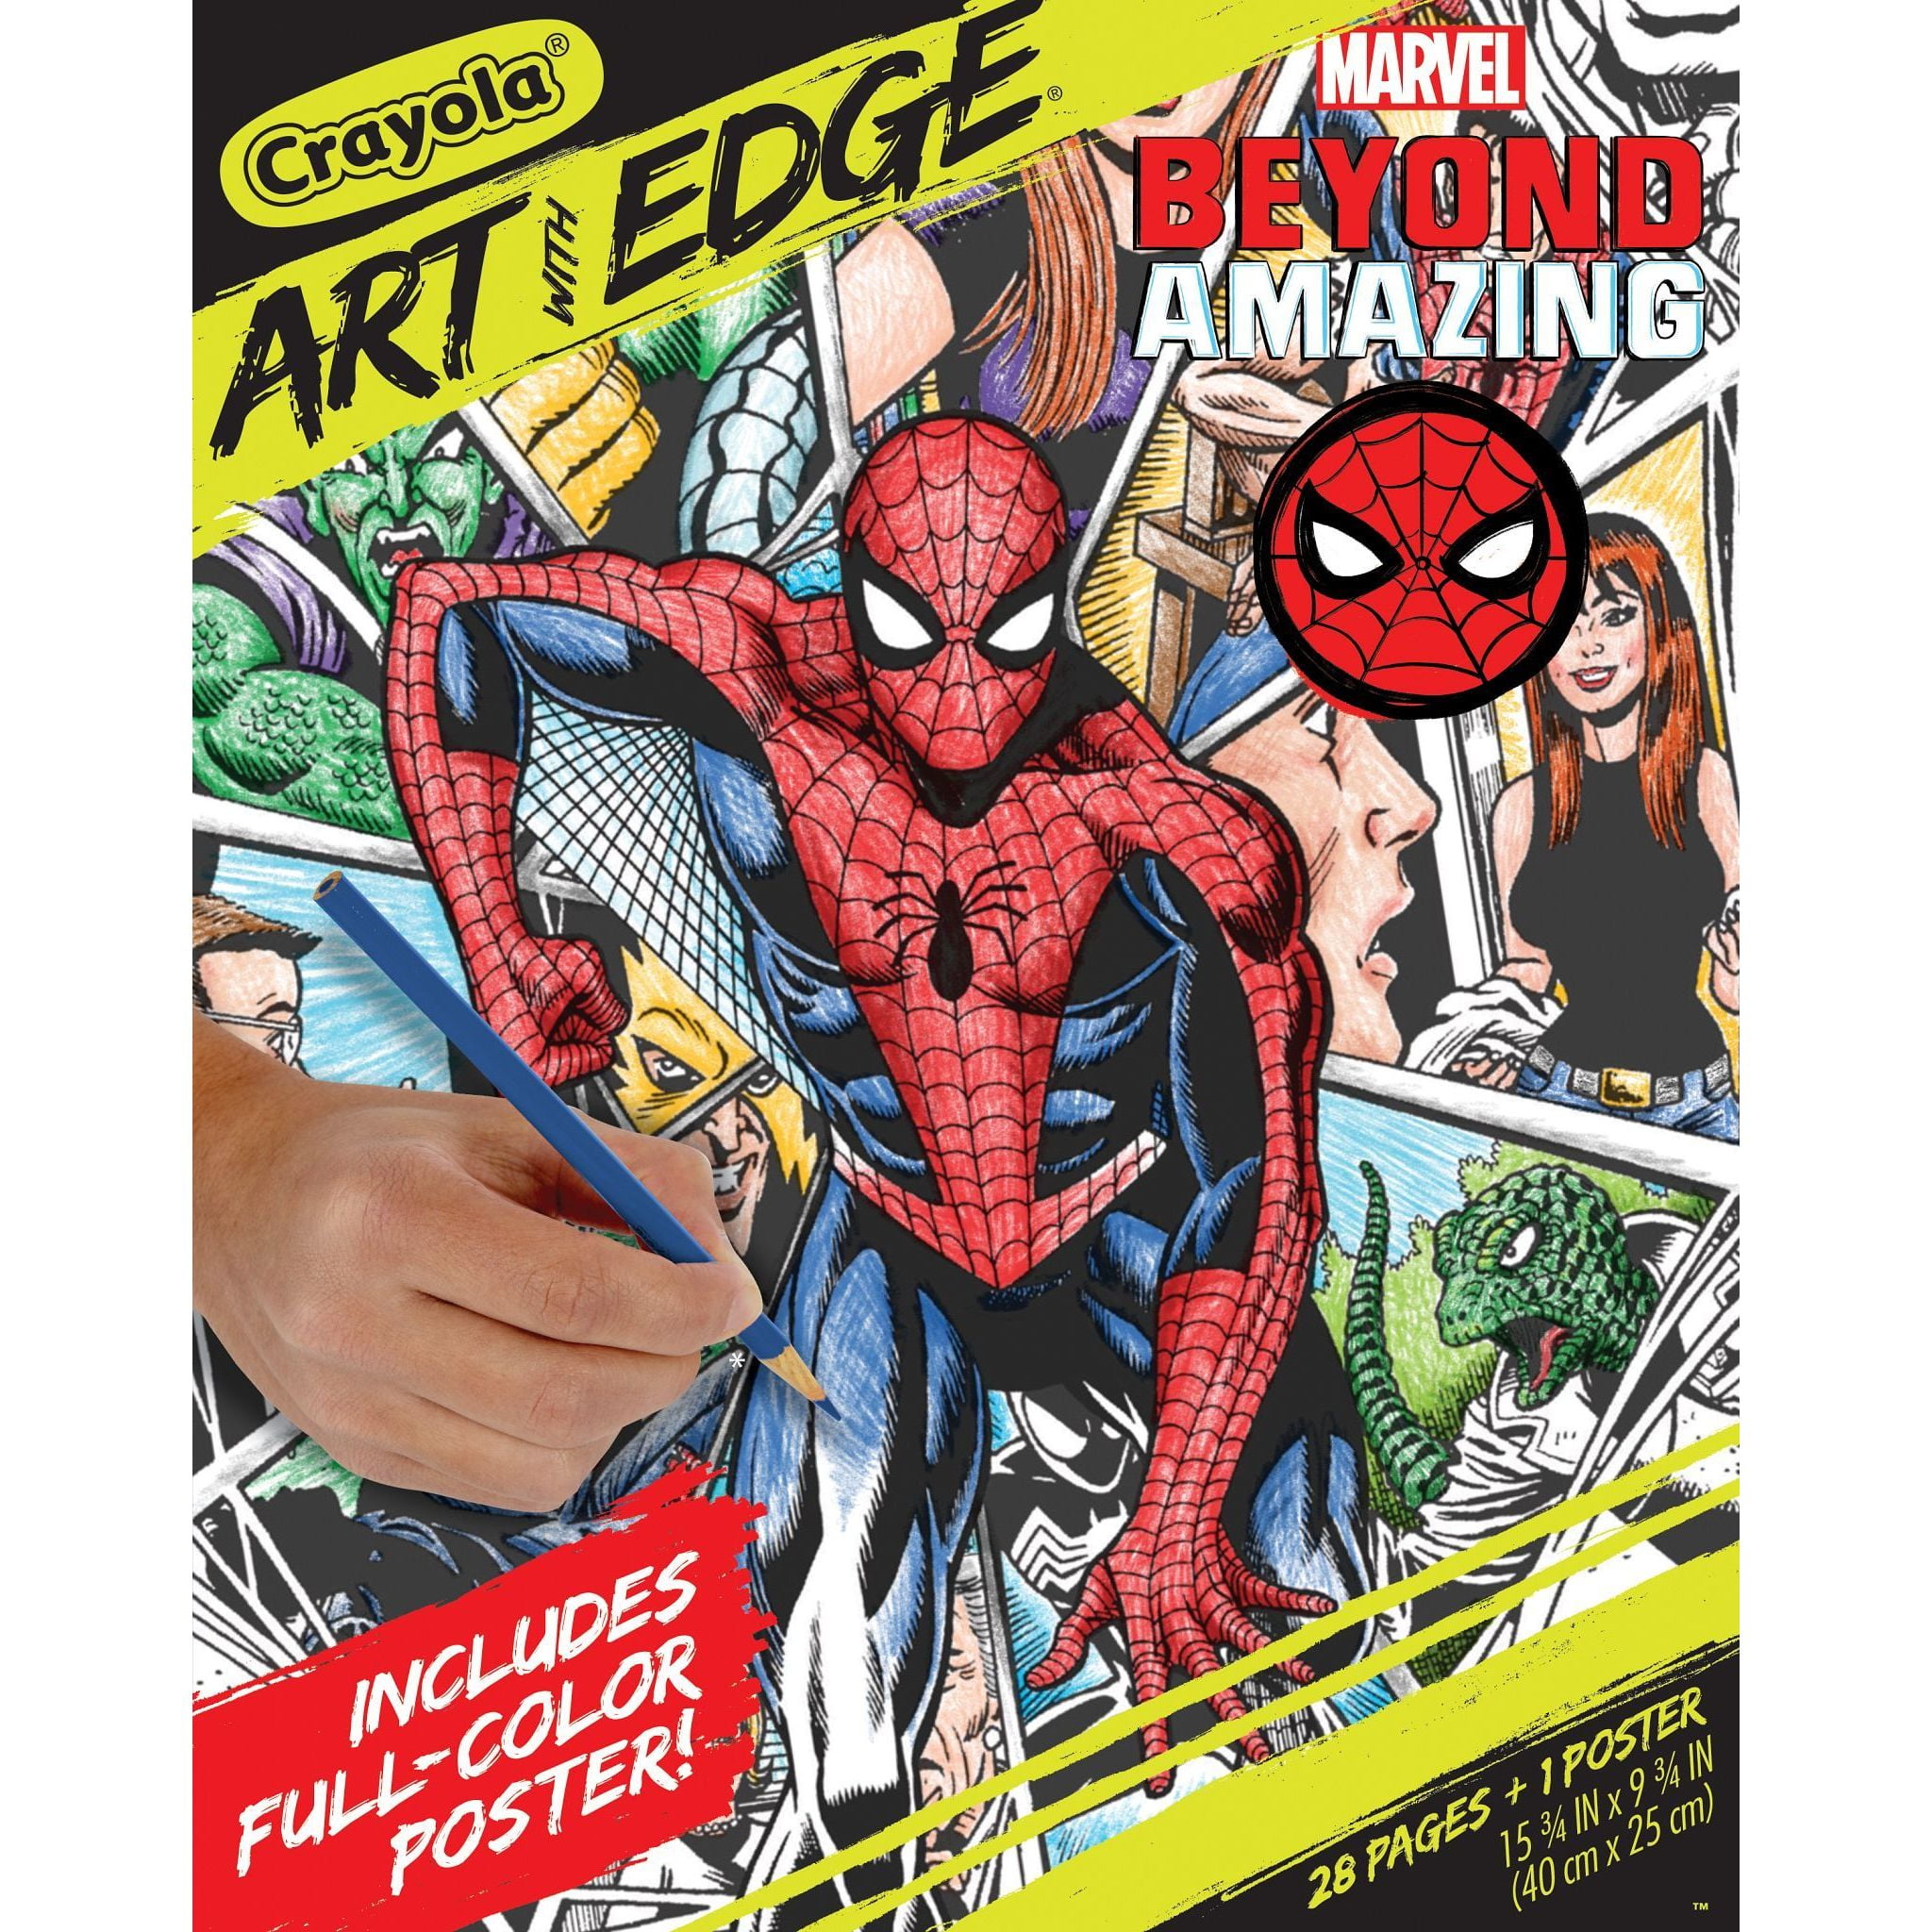 Crayola Spiderman Beyond Amazing, Art with Edge, Adult Coloring, Gift for Teens & Adults